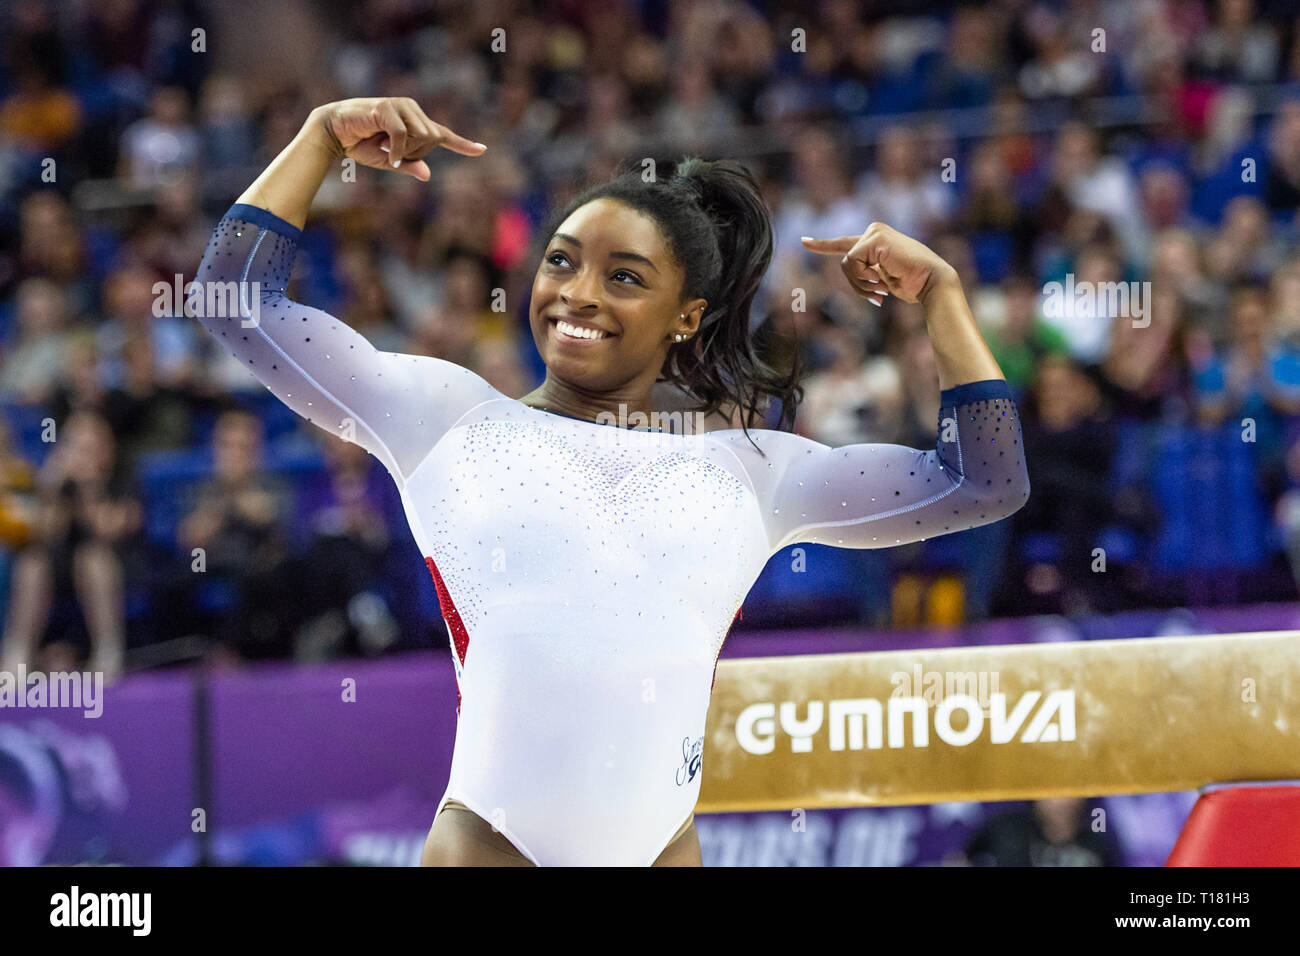 London, UK. 23rd Mar, 2019. Simone Biles of USA performs on Beam during the Matchroom Multisport presents the 2019 Superstars of Gymnastics at The O2 Arena on Saturday, 23 March 2019. LONDON ENGLAND. Credit: Taka Wu/Alamy Live News Stock Photo